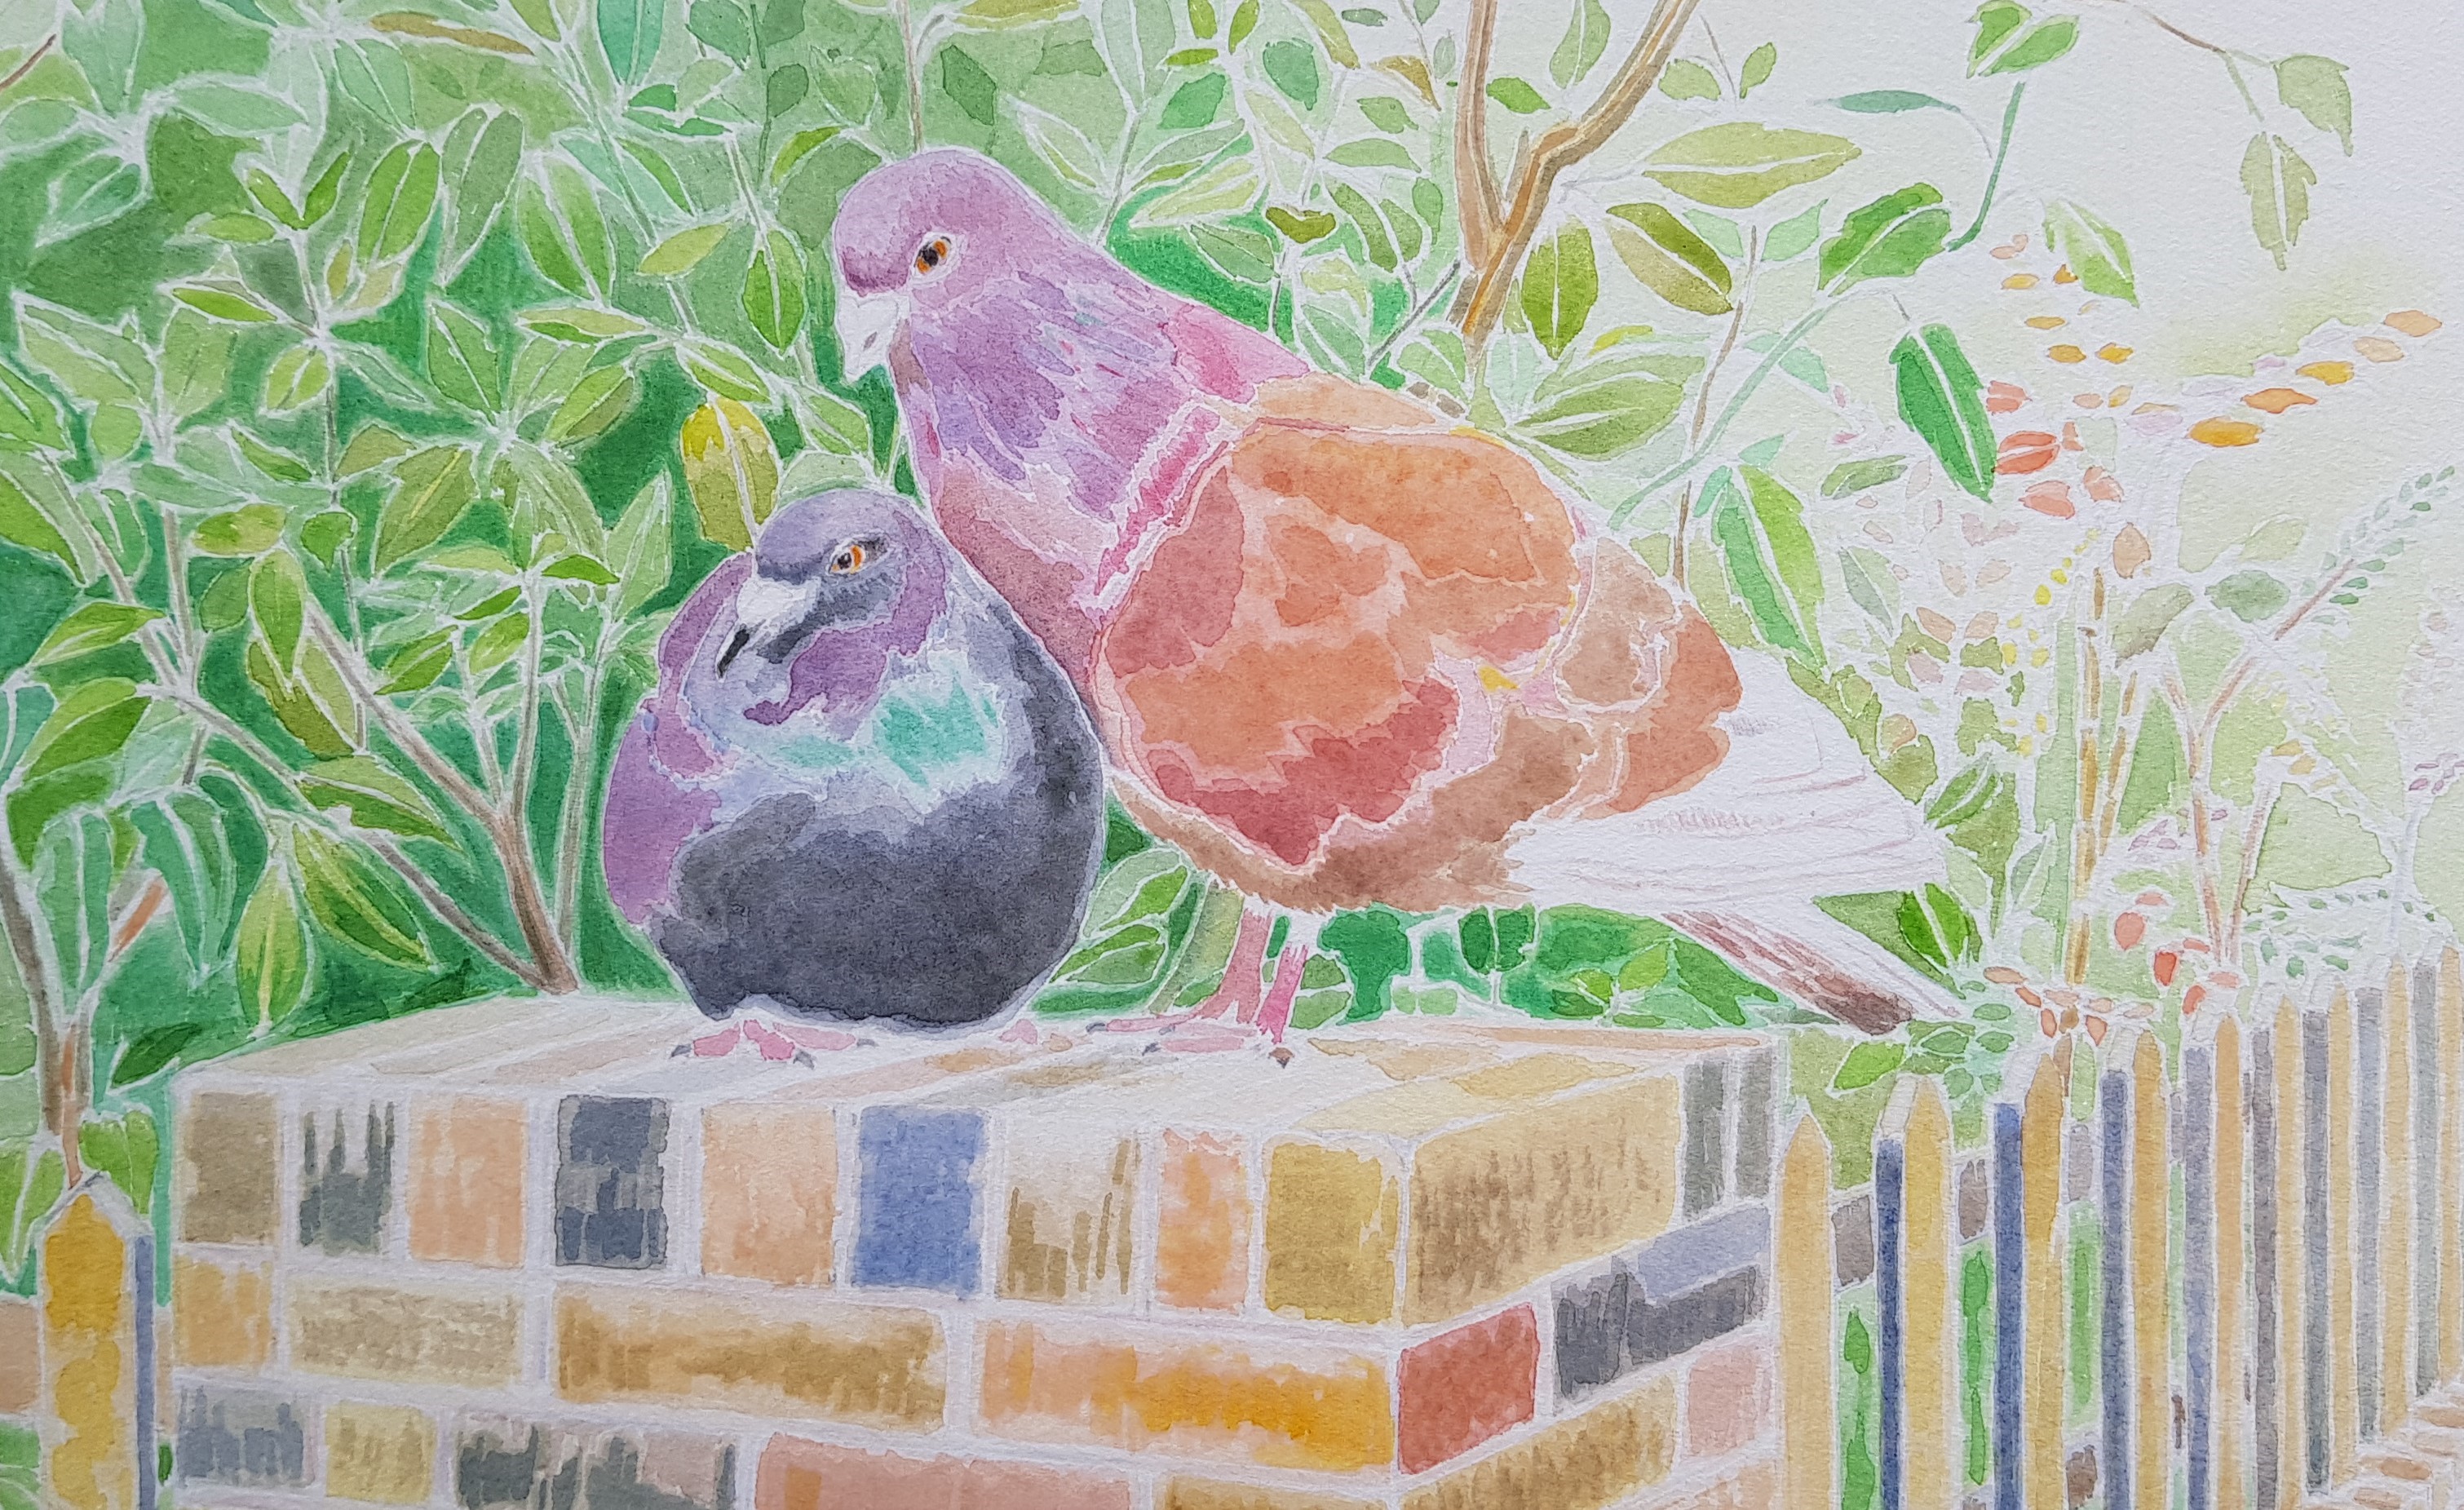 Watercolour of a pigeon sat on a brick wall